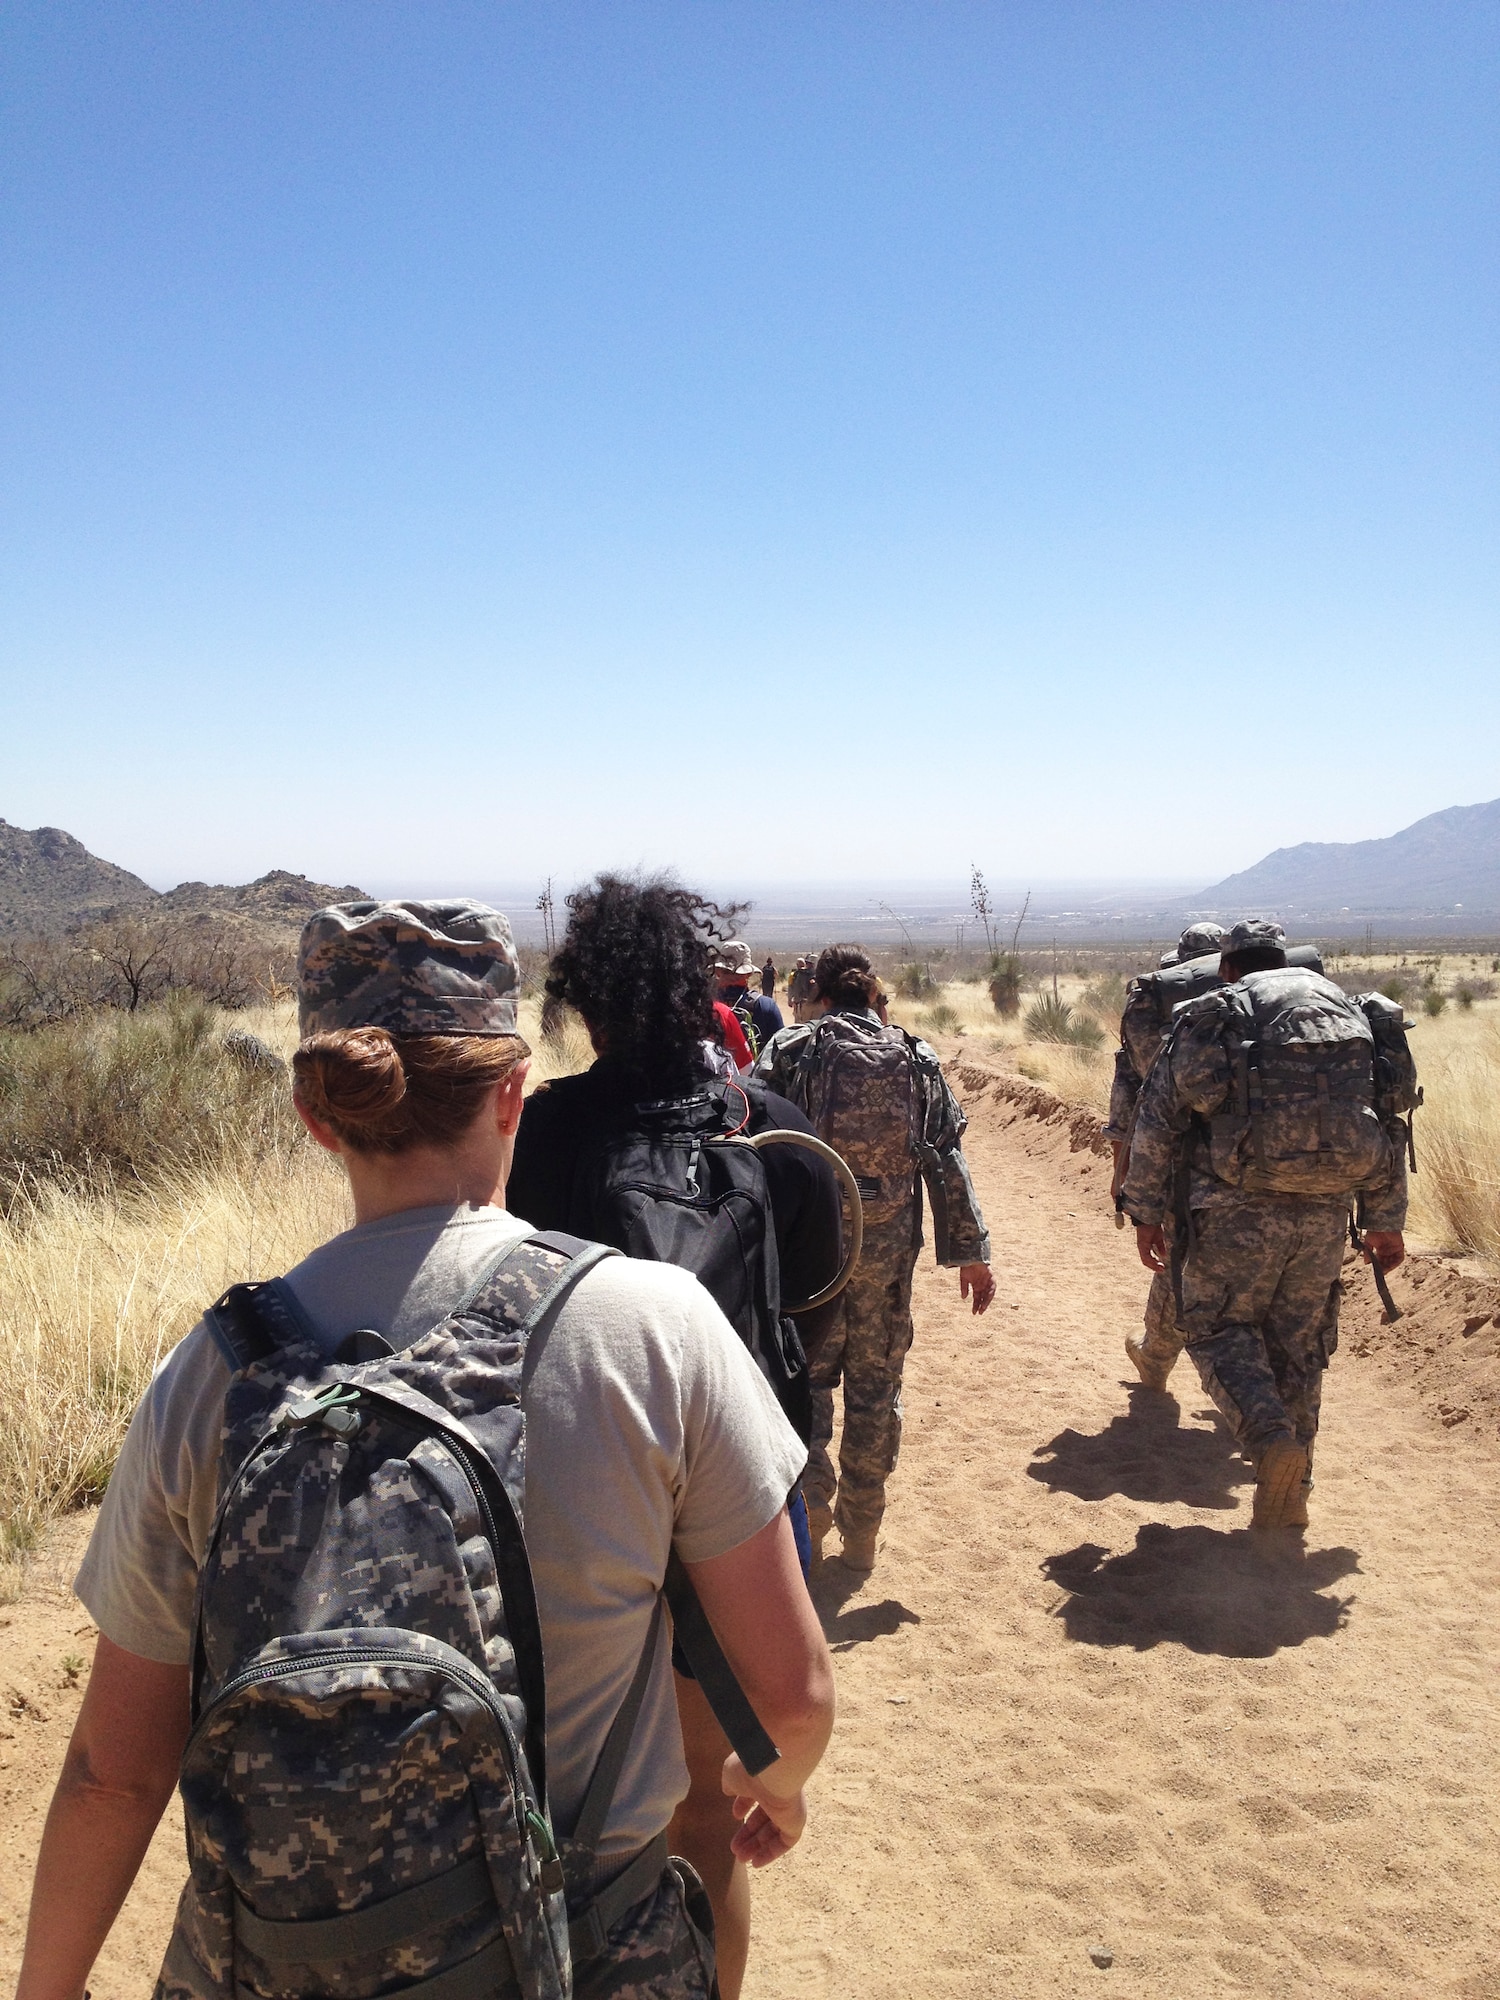 Tech. Sgt. Jennifer Lindner, 412th Operations Group, marches in the 25th Annual Bataan Memorial Death March on March 24, 2014. (Courtesy photo)